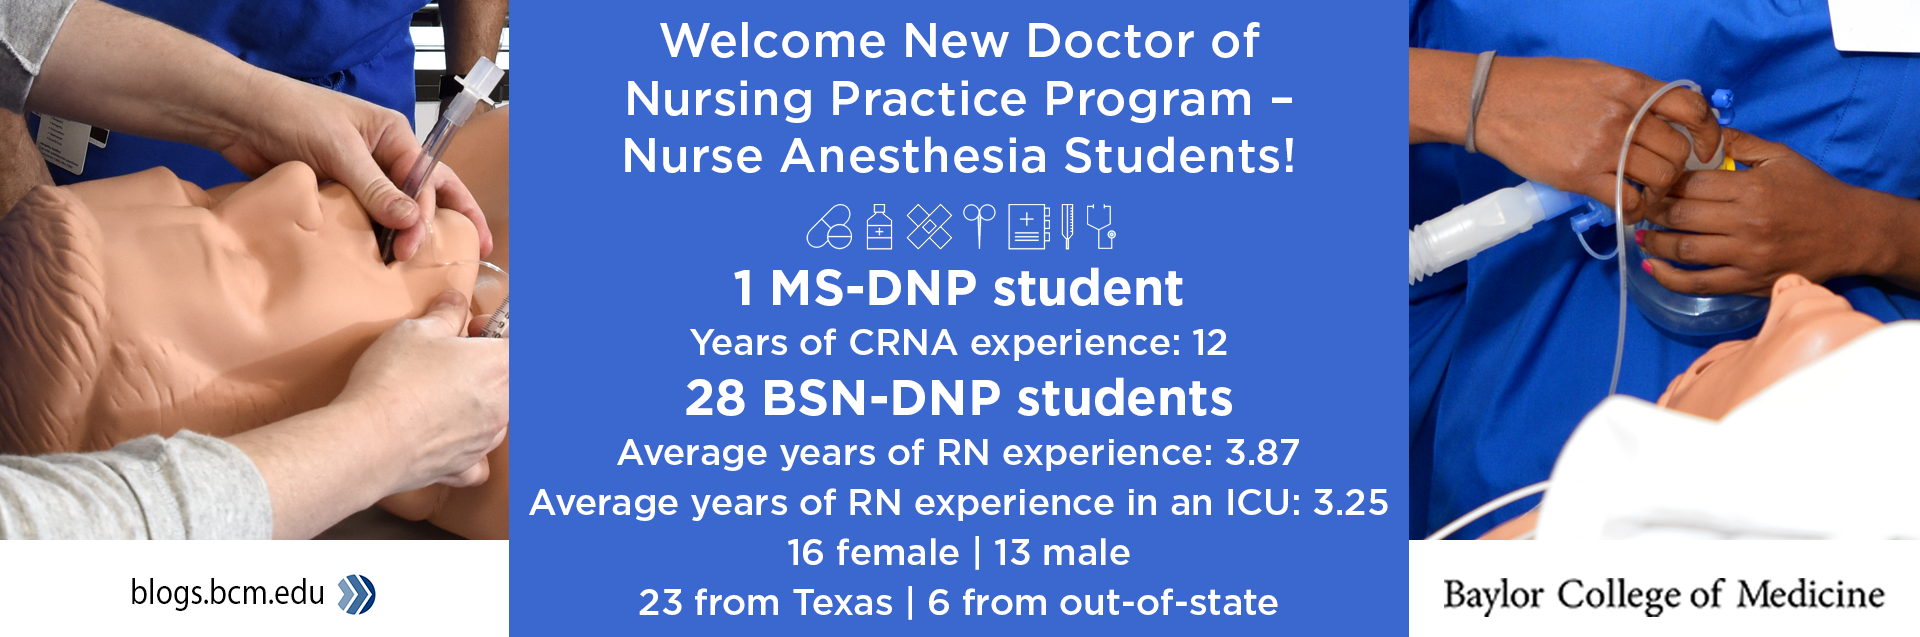 Information on the new students: 1 MS-DNP student with 12 years of CRNA experience. 28 BSN-DNP students. Average years of RN experience: 3.87. Average years of RN experience in an ICU: 3.25. 16 female. 13 male. 23 from Texas. 6 from out-of-state